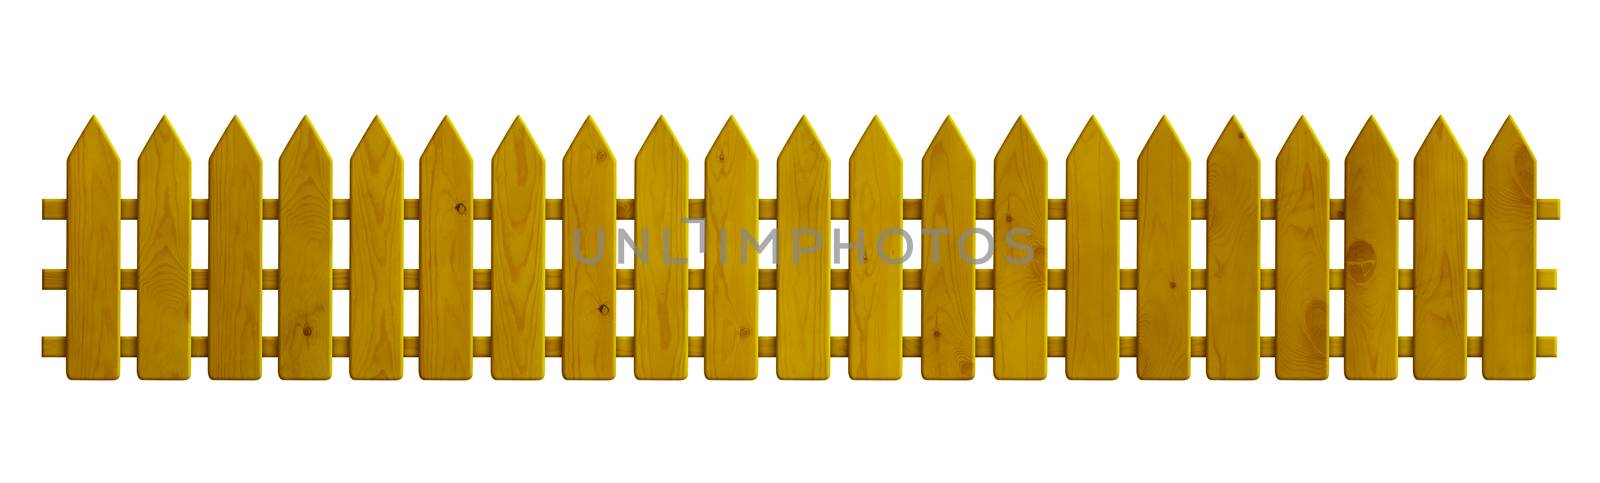 Wooden long yellow fence isolated on white background